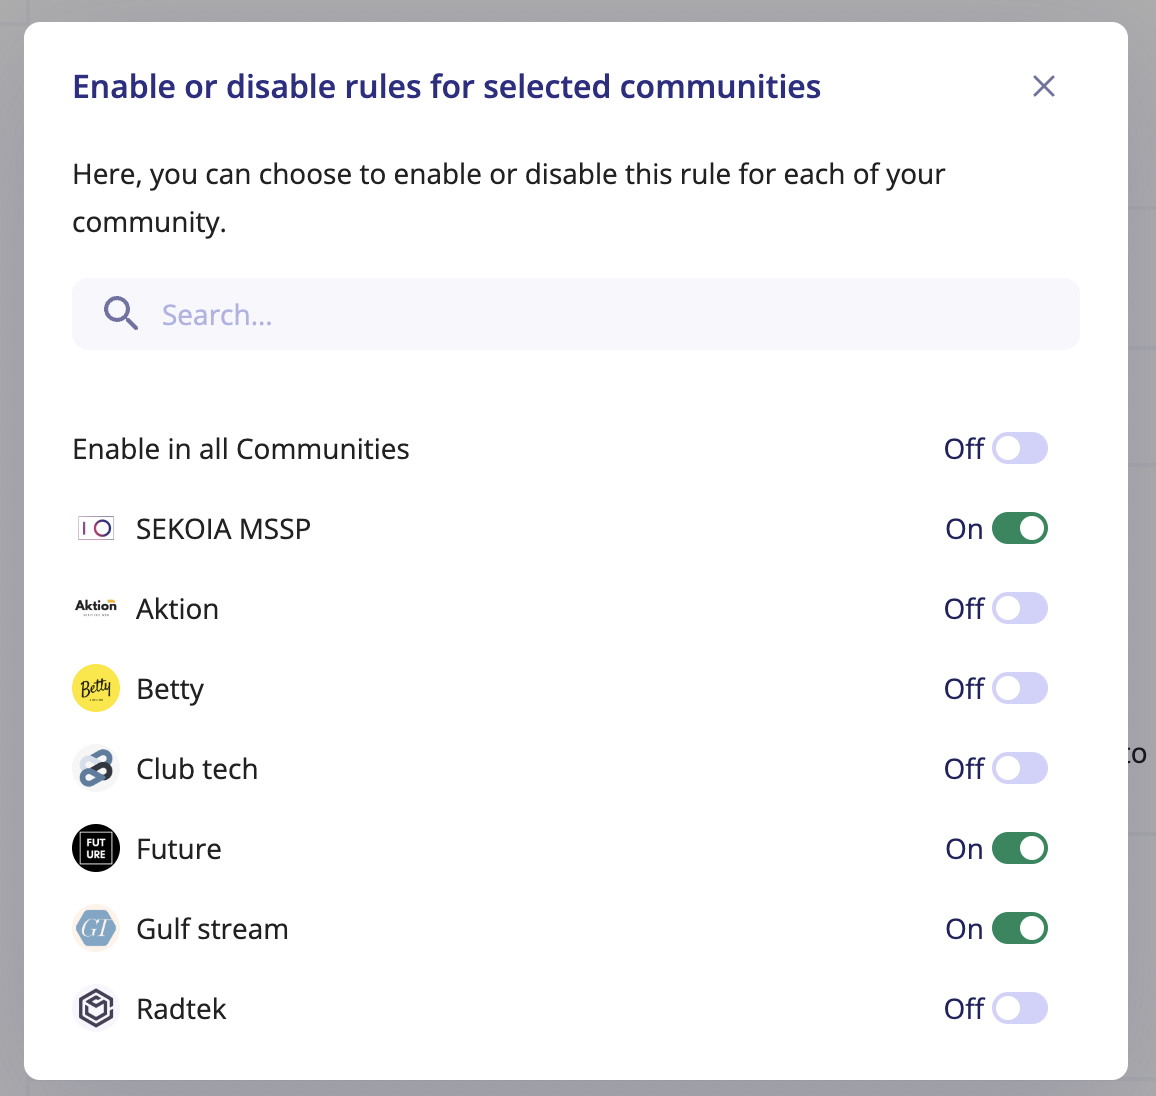 Enable rules for MSSP community